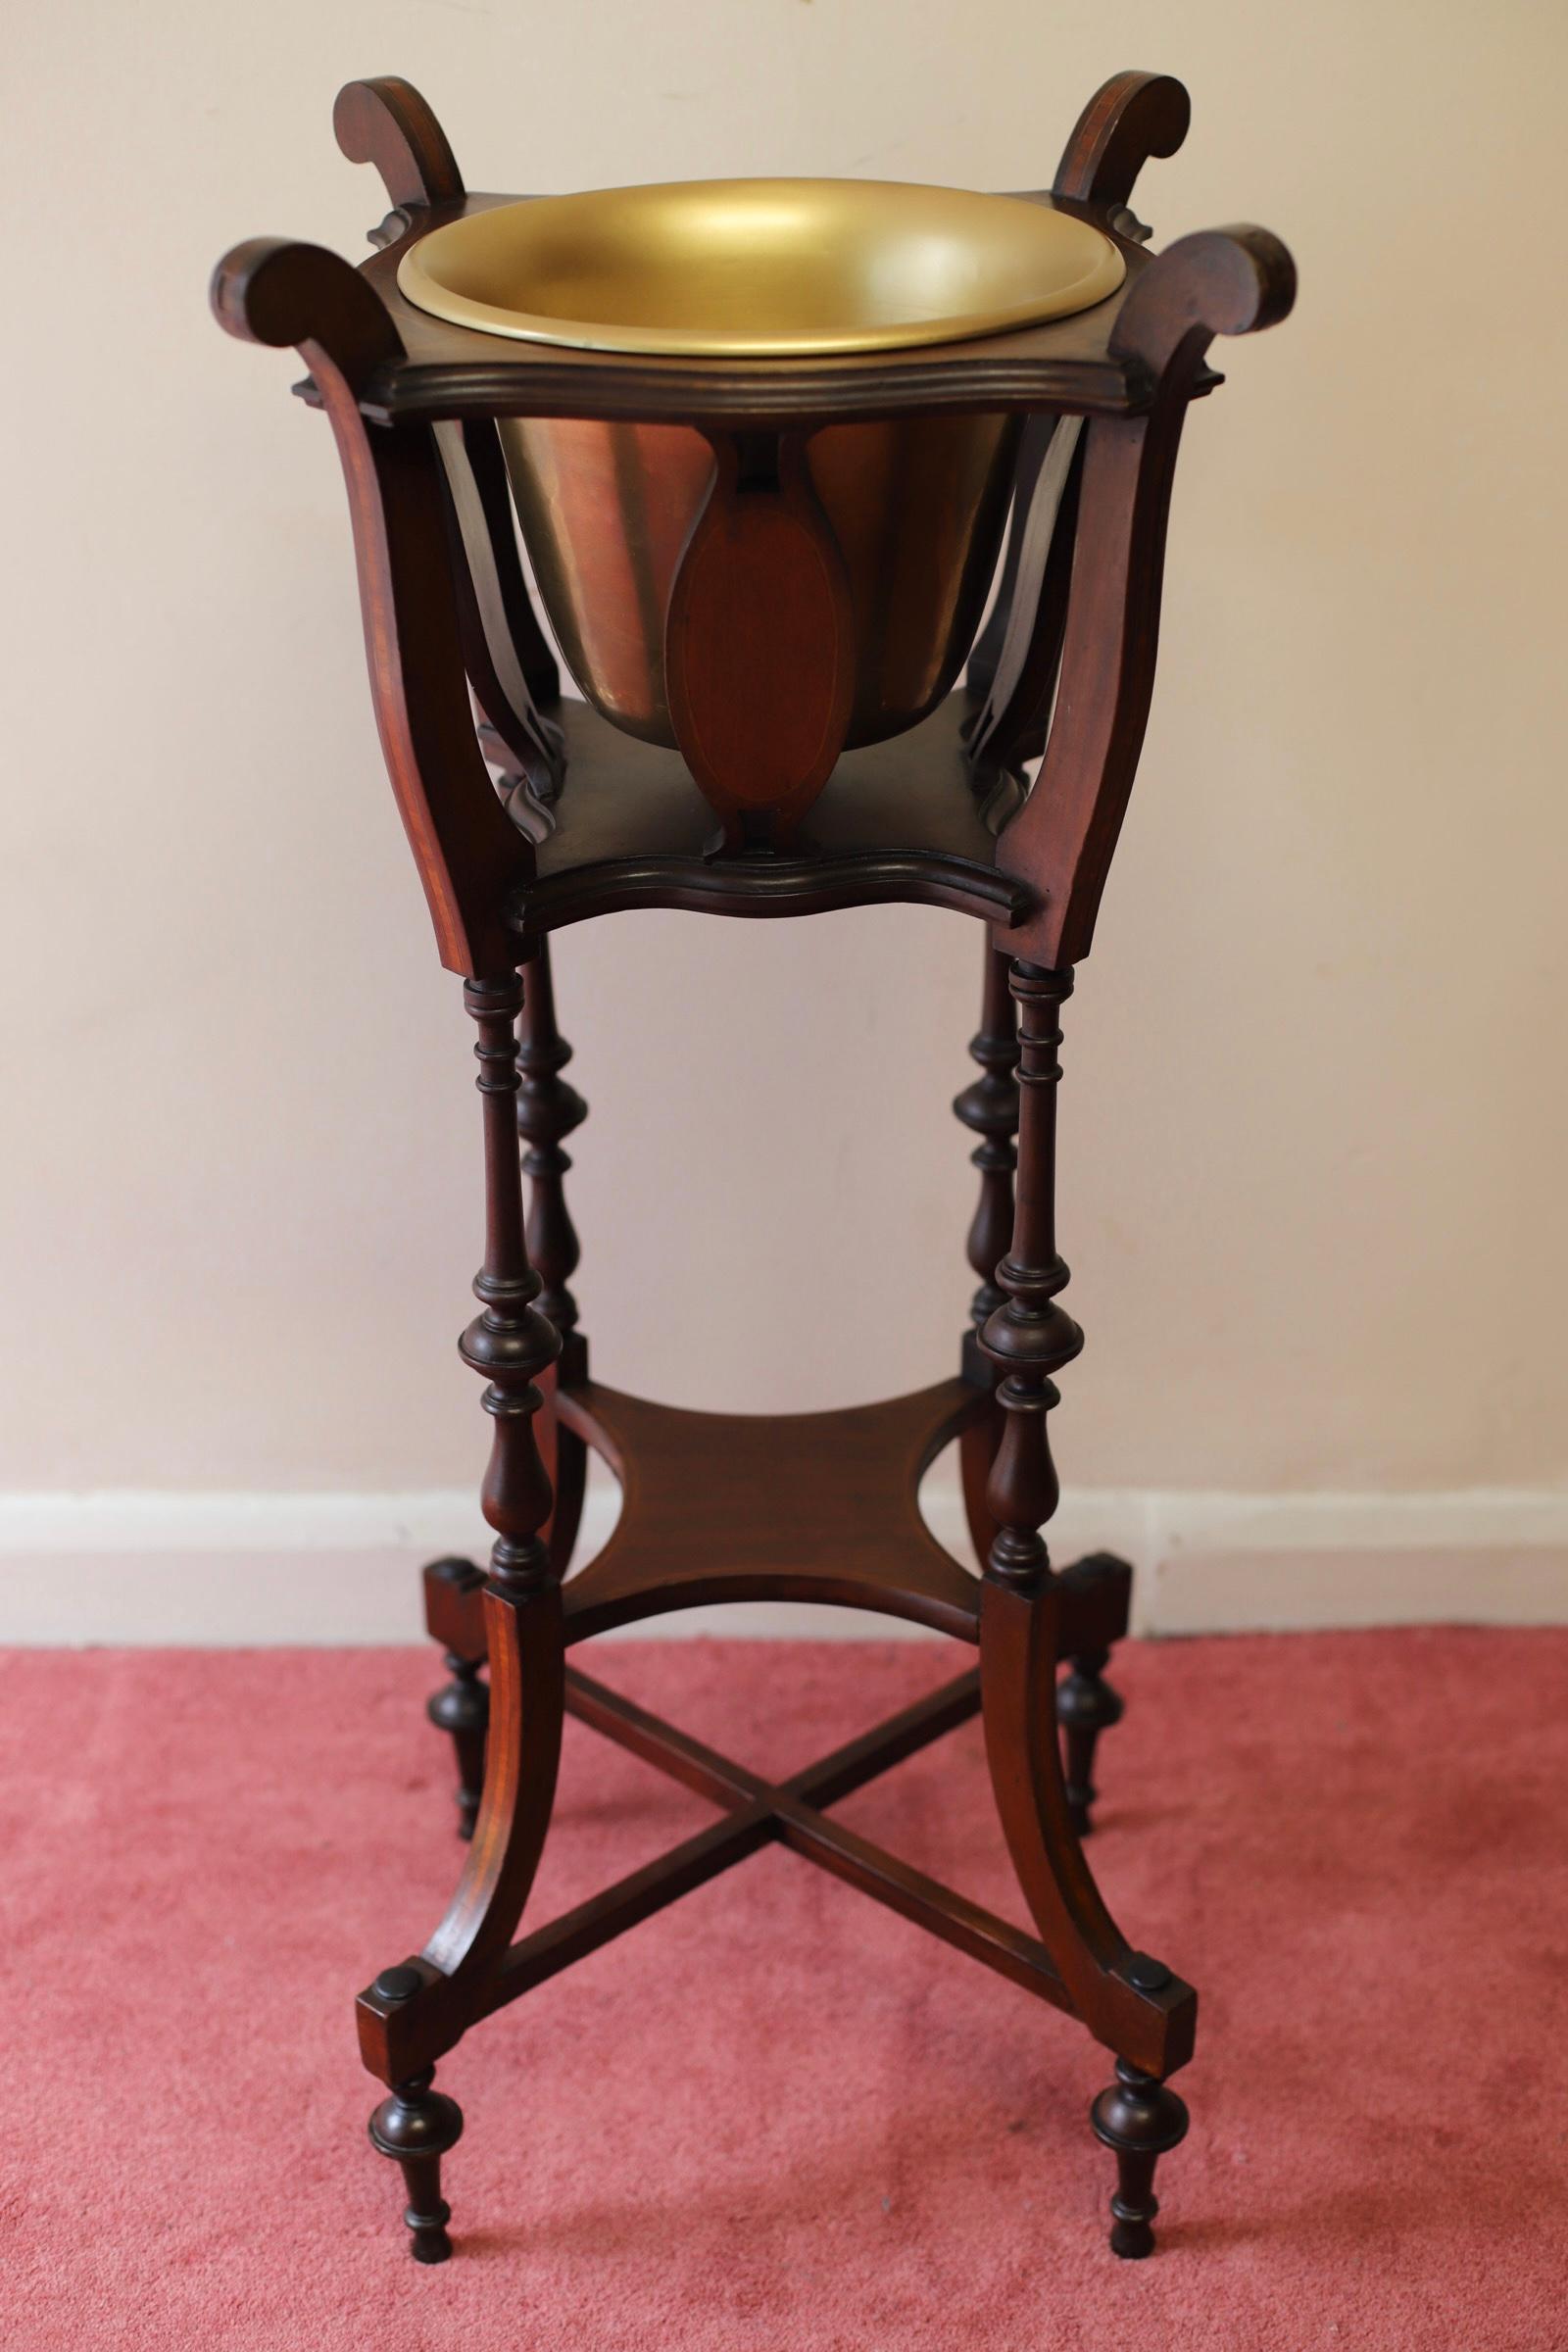 We delight to offer for sale and antique Edwardian hardwood  and boxwood line inlaid jardinière stand, fitted with a brass pot. 
Don't hesitate to contact me if you have any questions.
Please have a closer look at the pictures because they form part